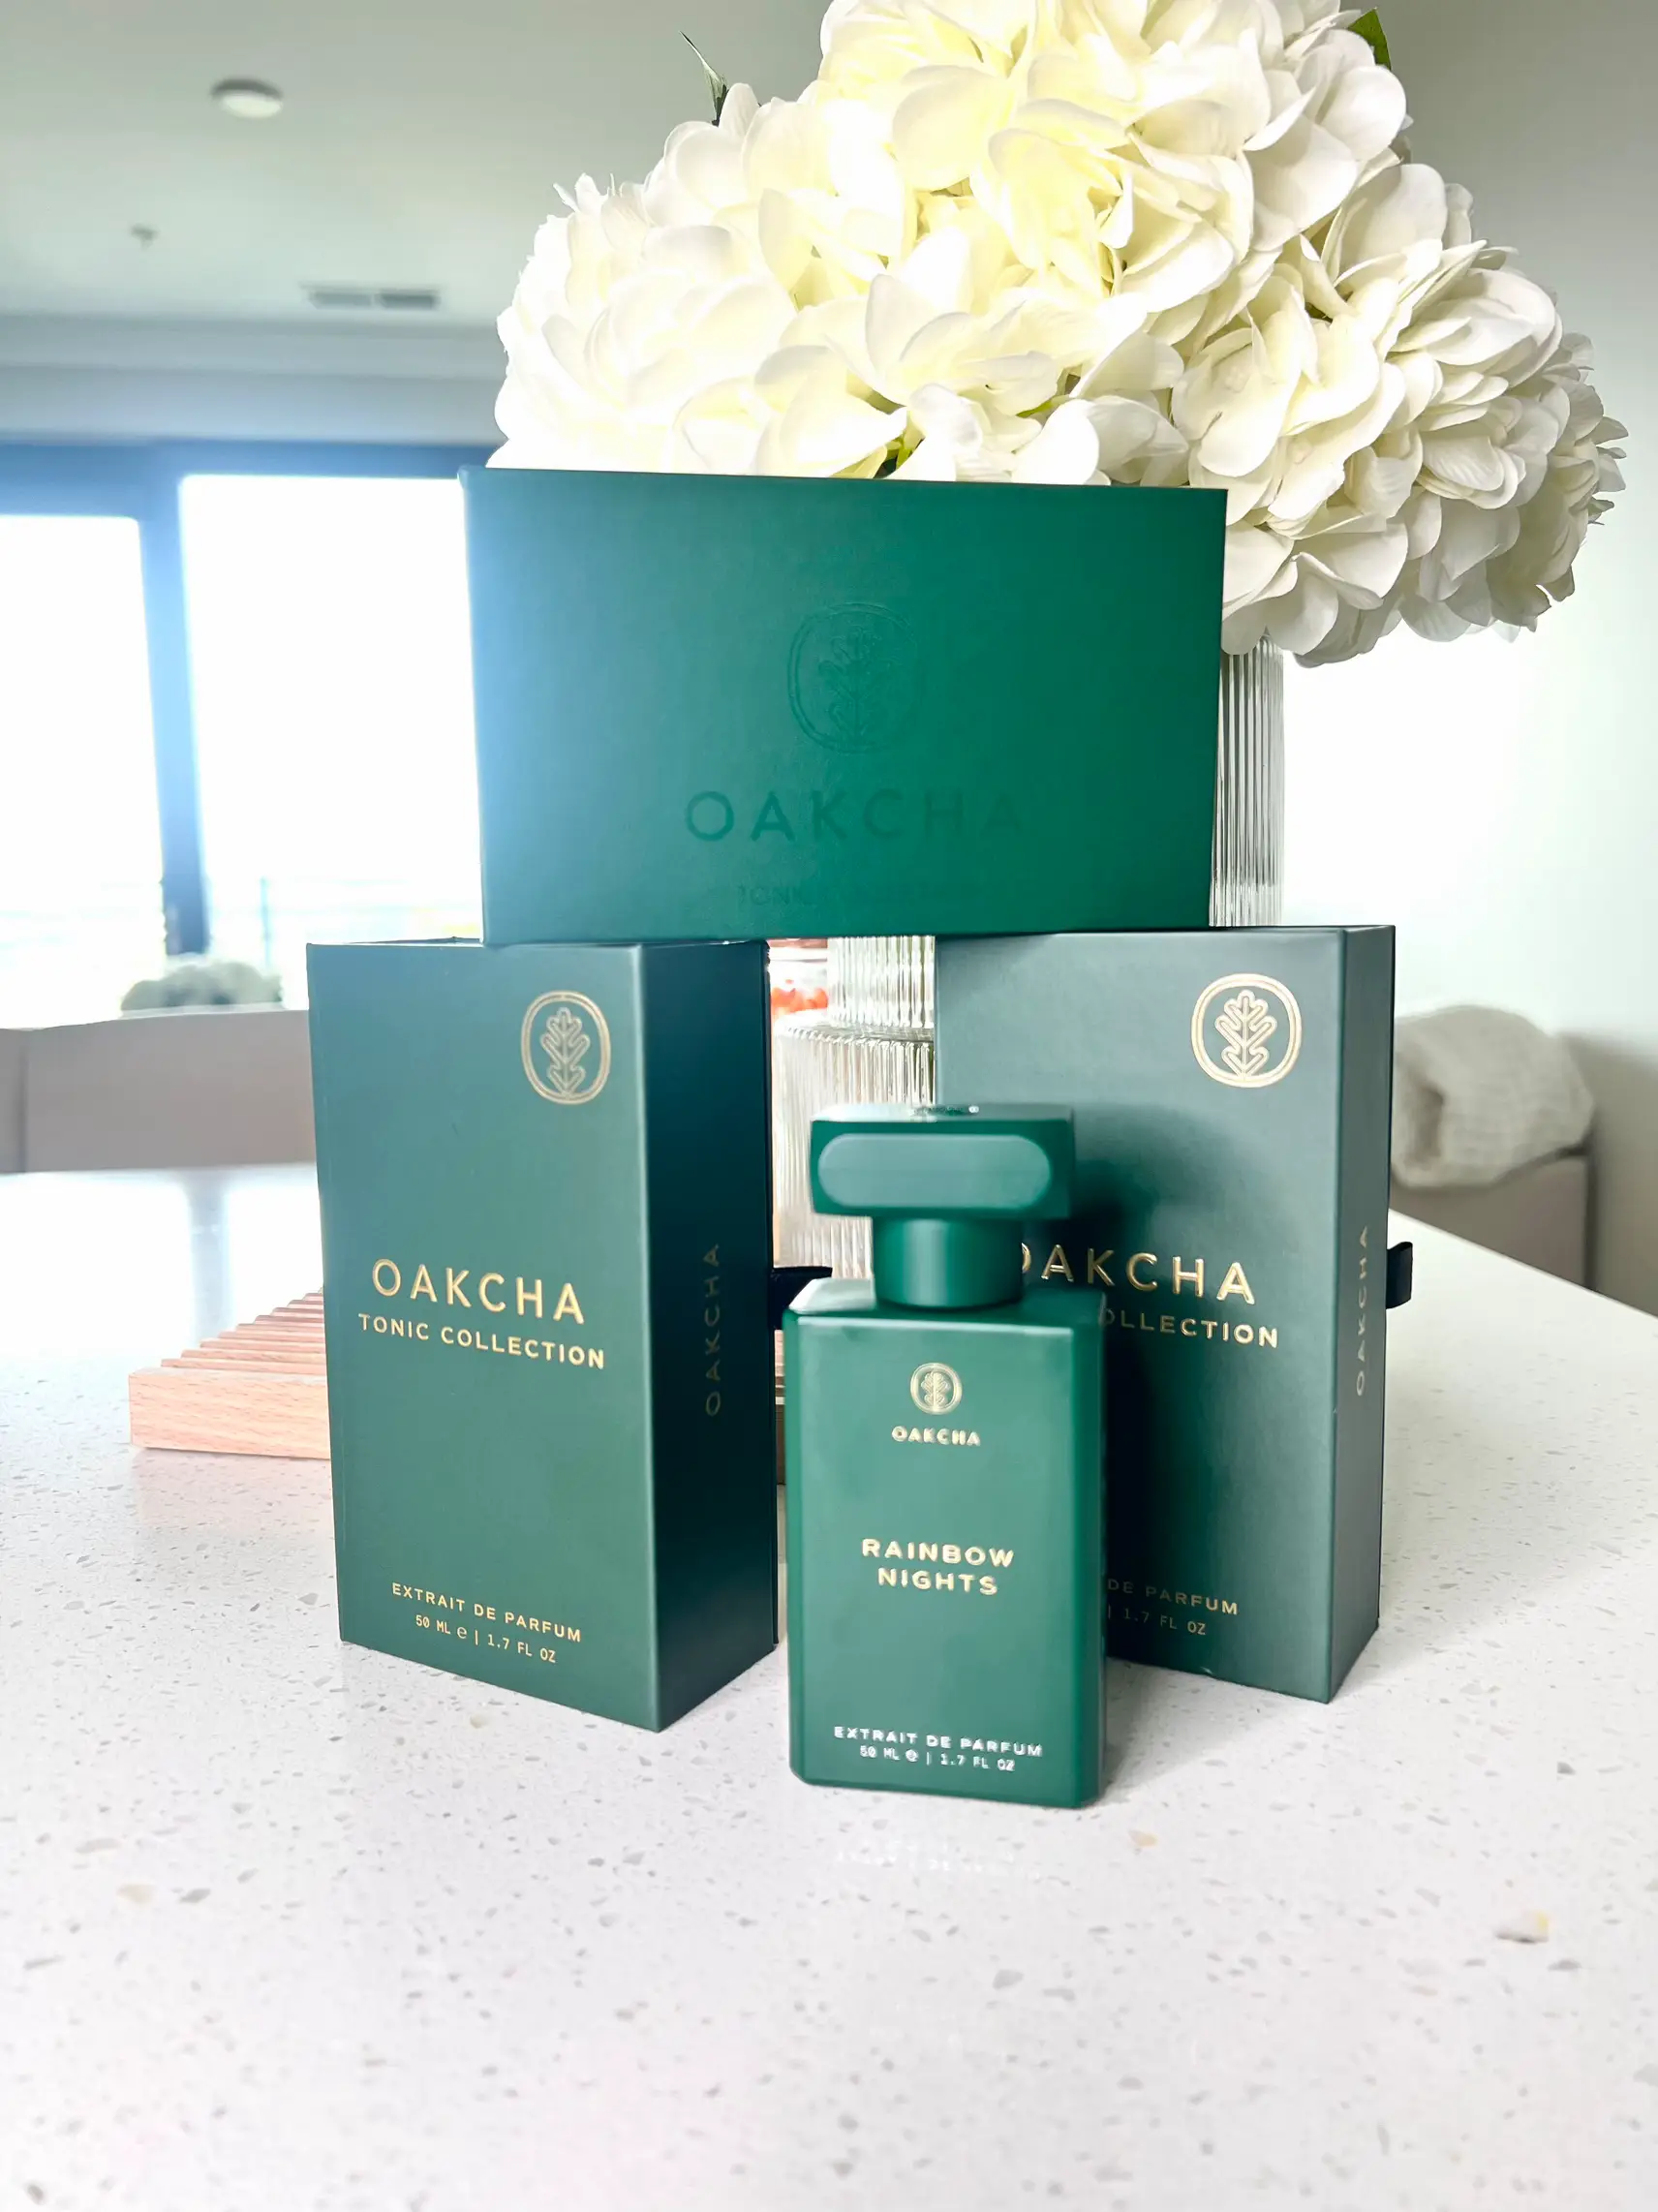 OakchaGiftedMe two of their new dupe fragrances to try out. They smel, Oakcha Perfume